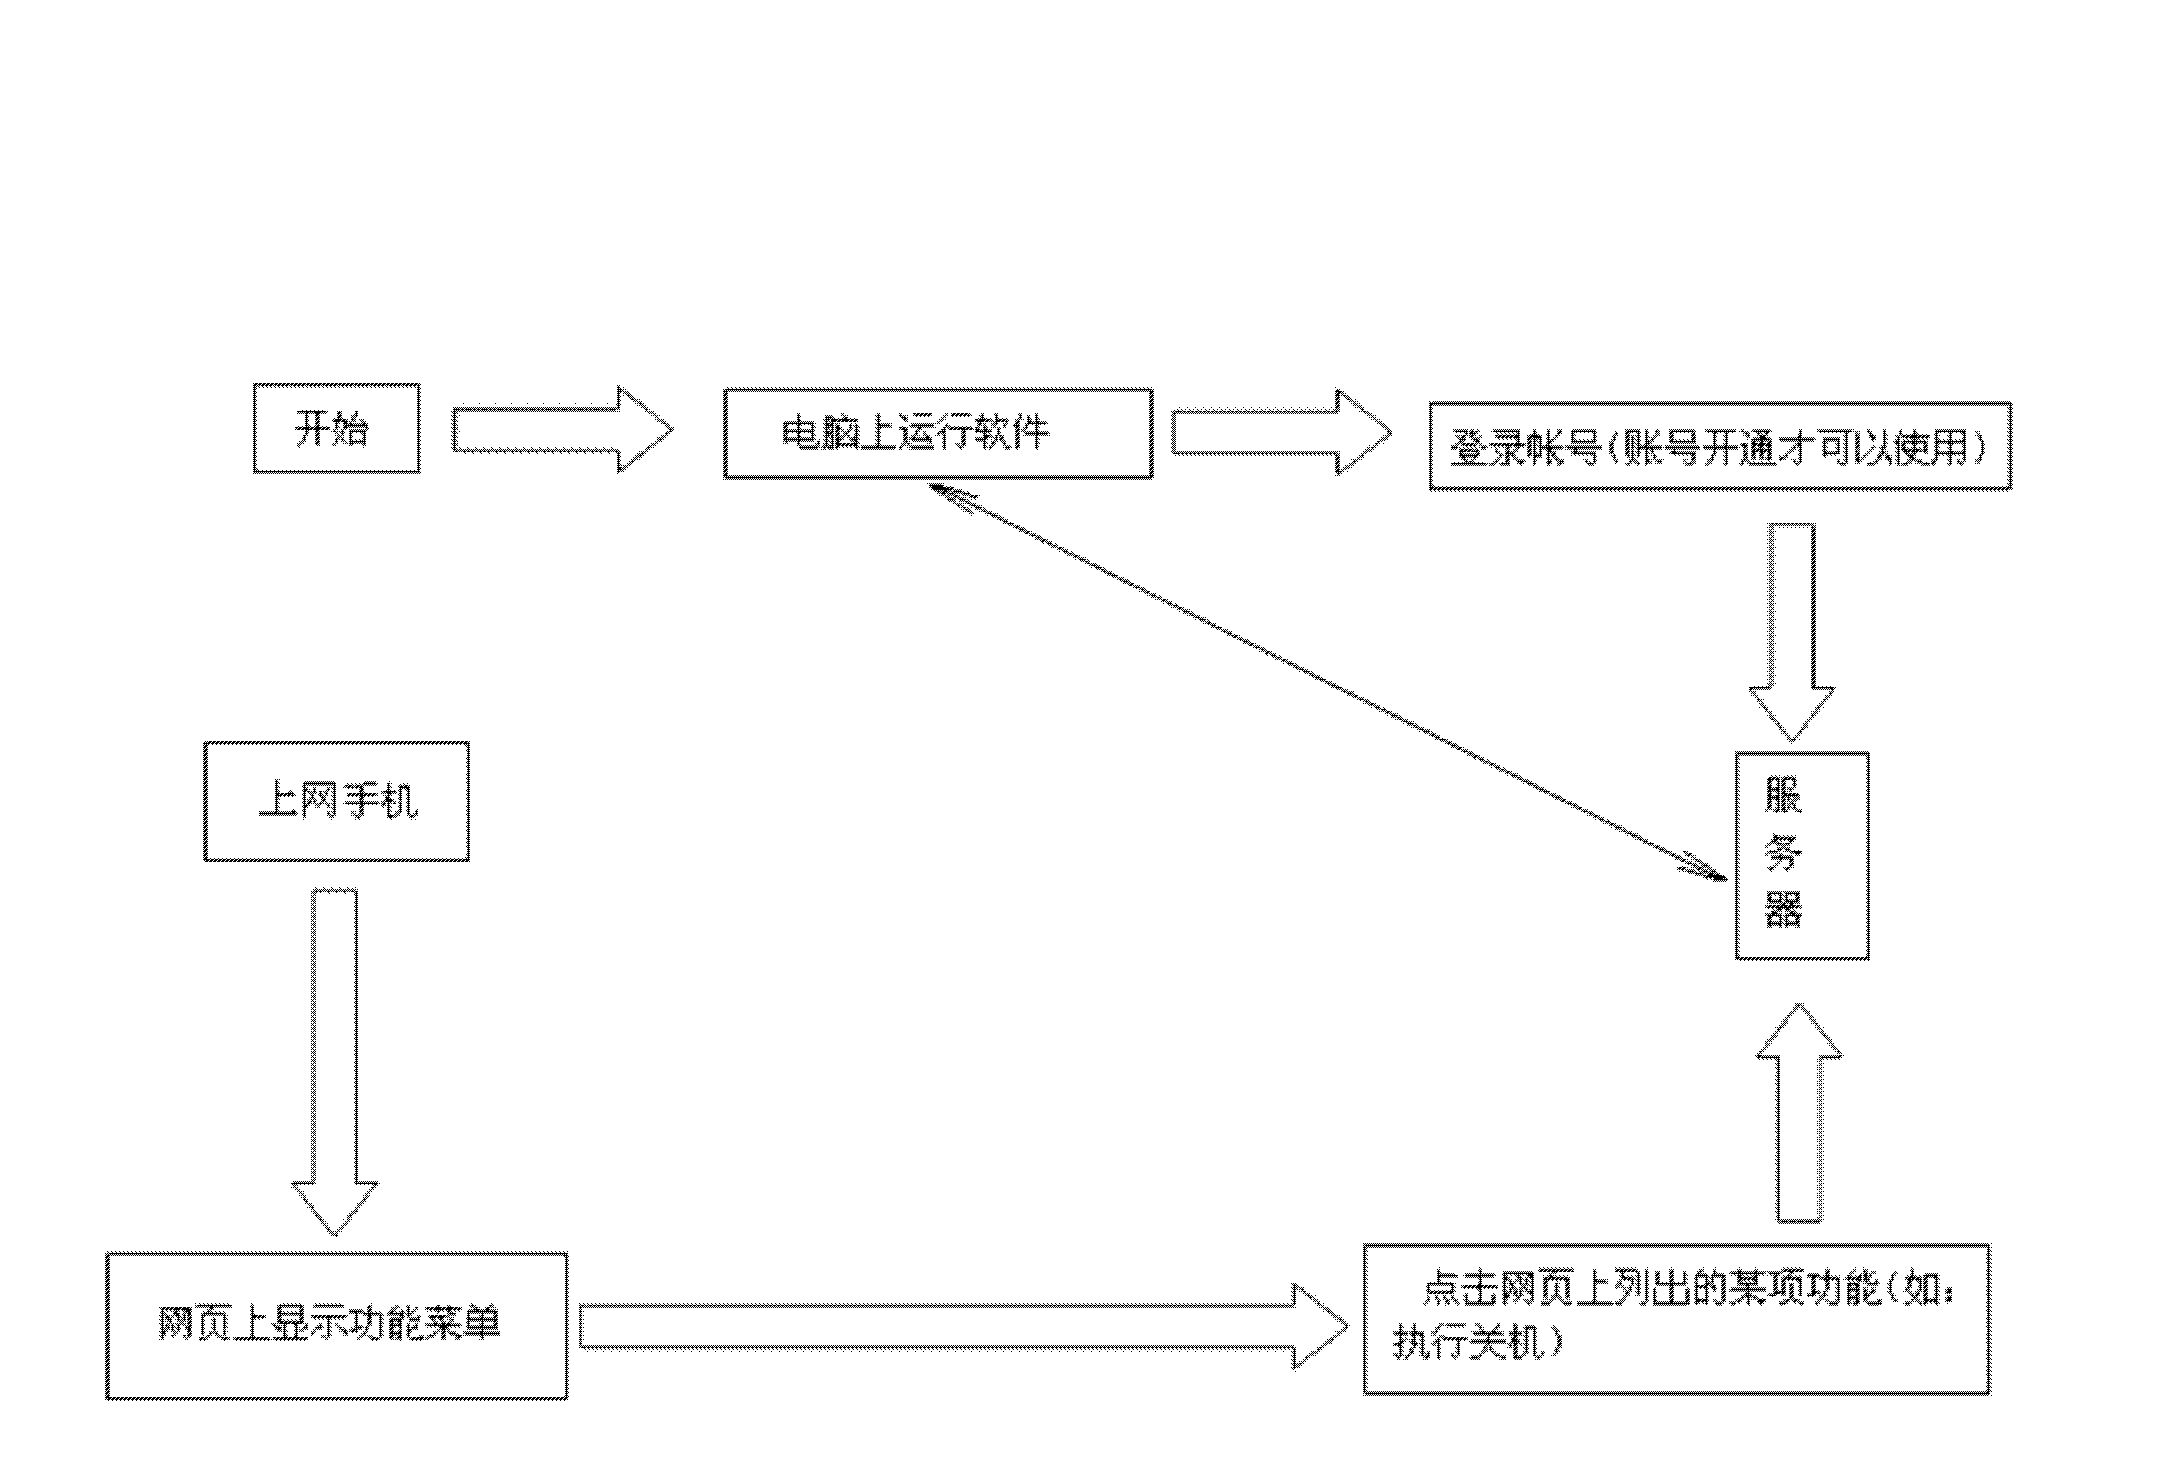 Method for remotely controlling computer by using mobile phone